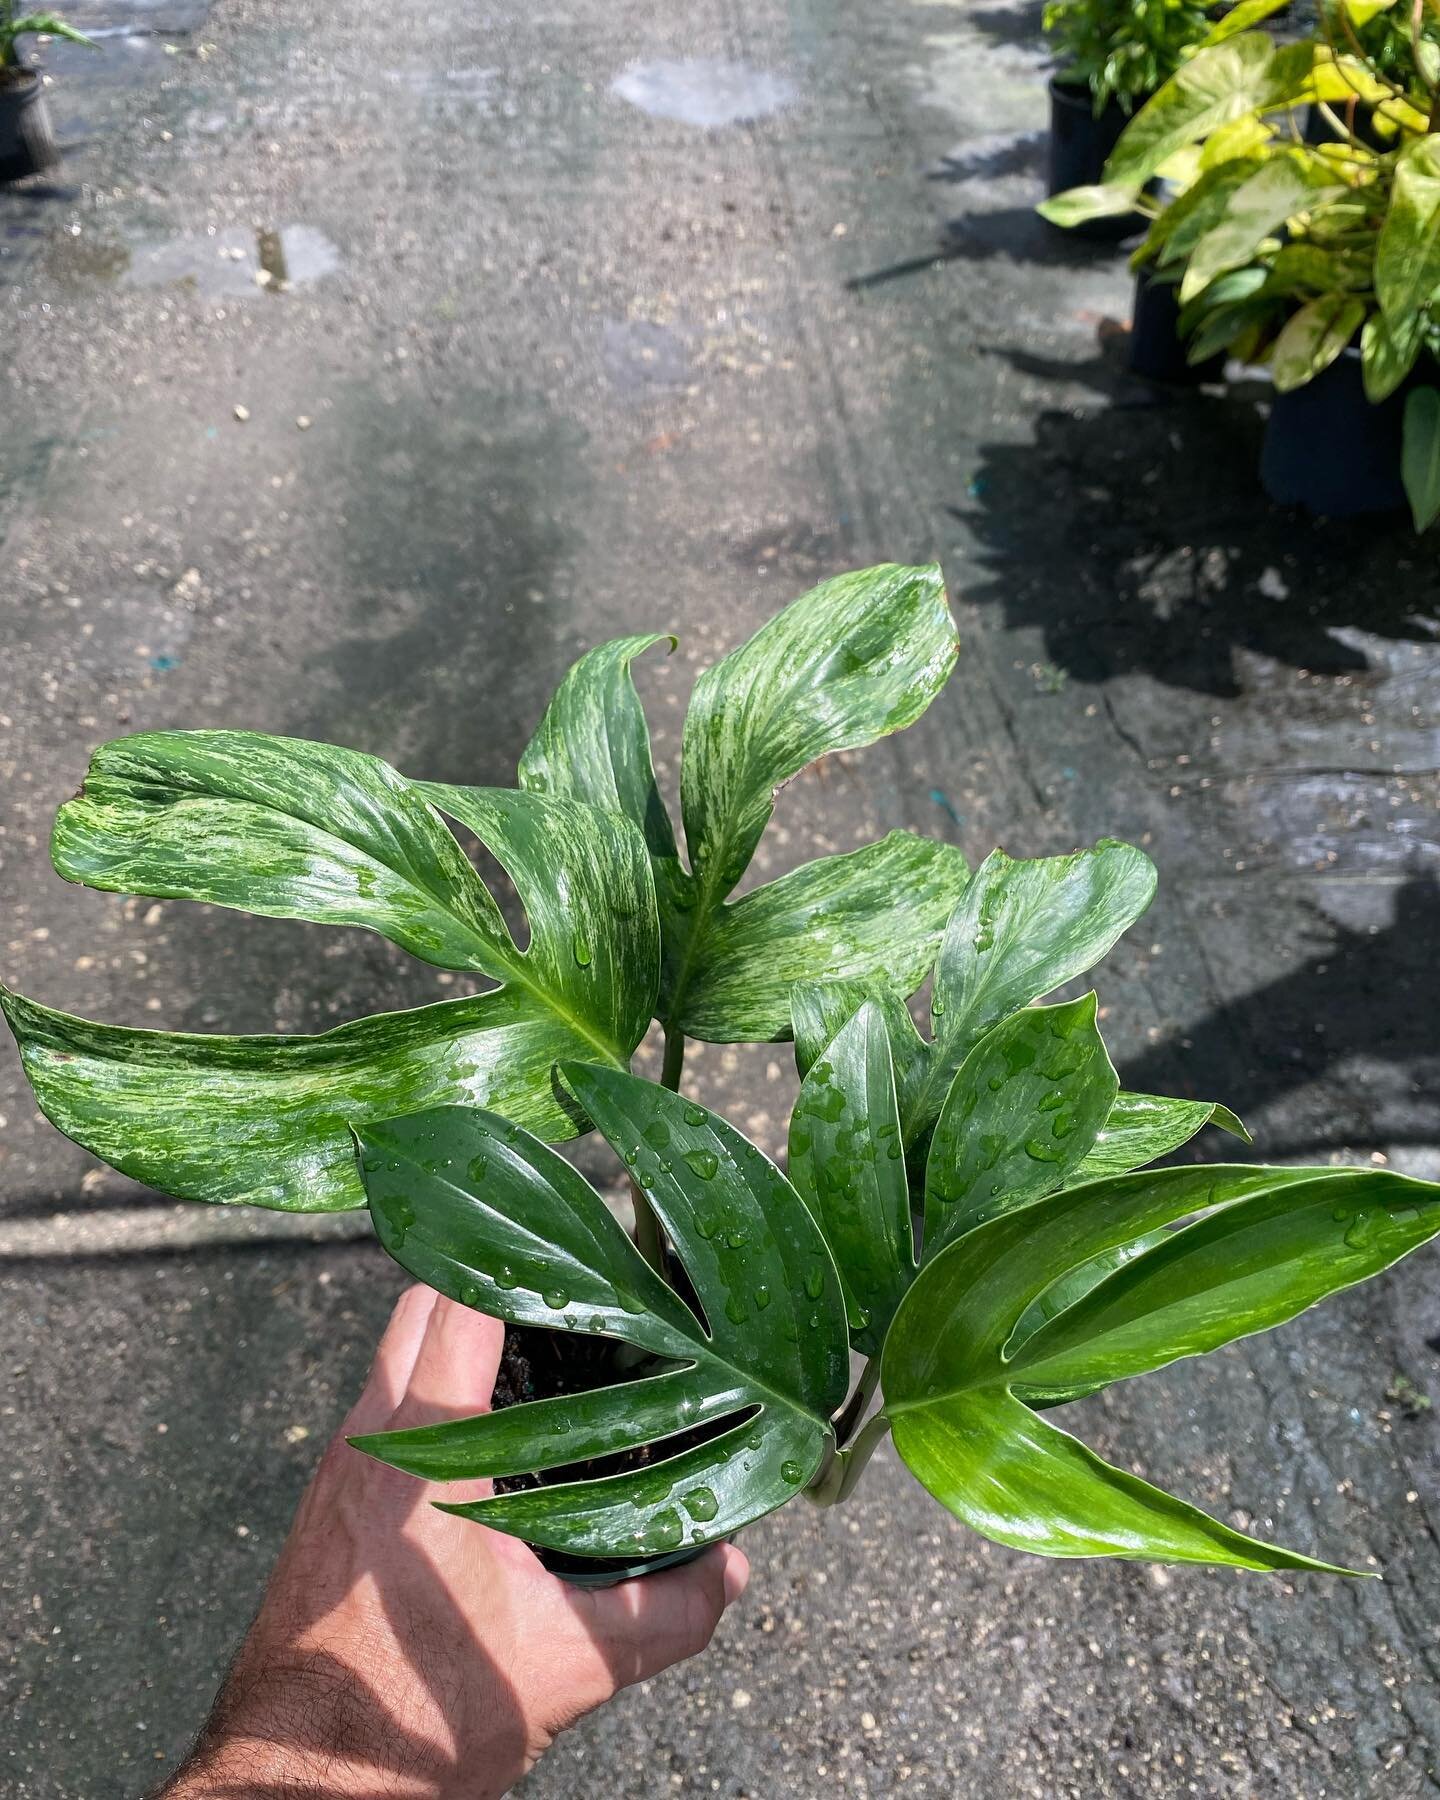 Here&rsquo;s a tale about a Variegated Dragon Tail that lost its way &ndash;

We shipped one of our 4&rdquo; Variegated Rhaphidaphora Dragon Tail plants out on September 21 (pics 1 and 2). It was sent two day air and due to an autofill error, got ret